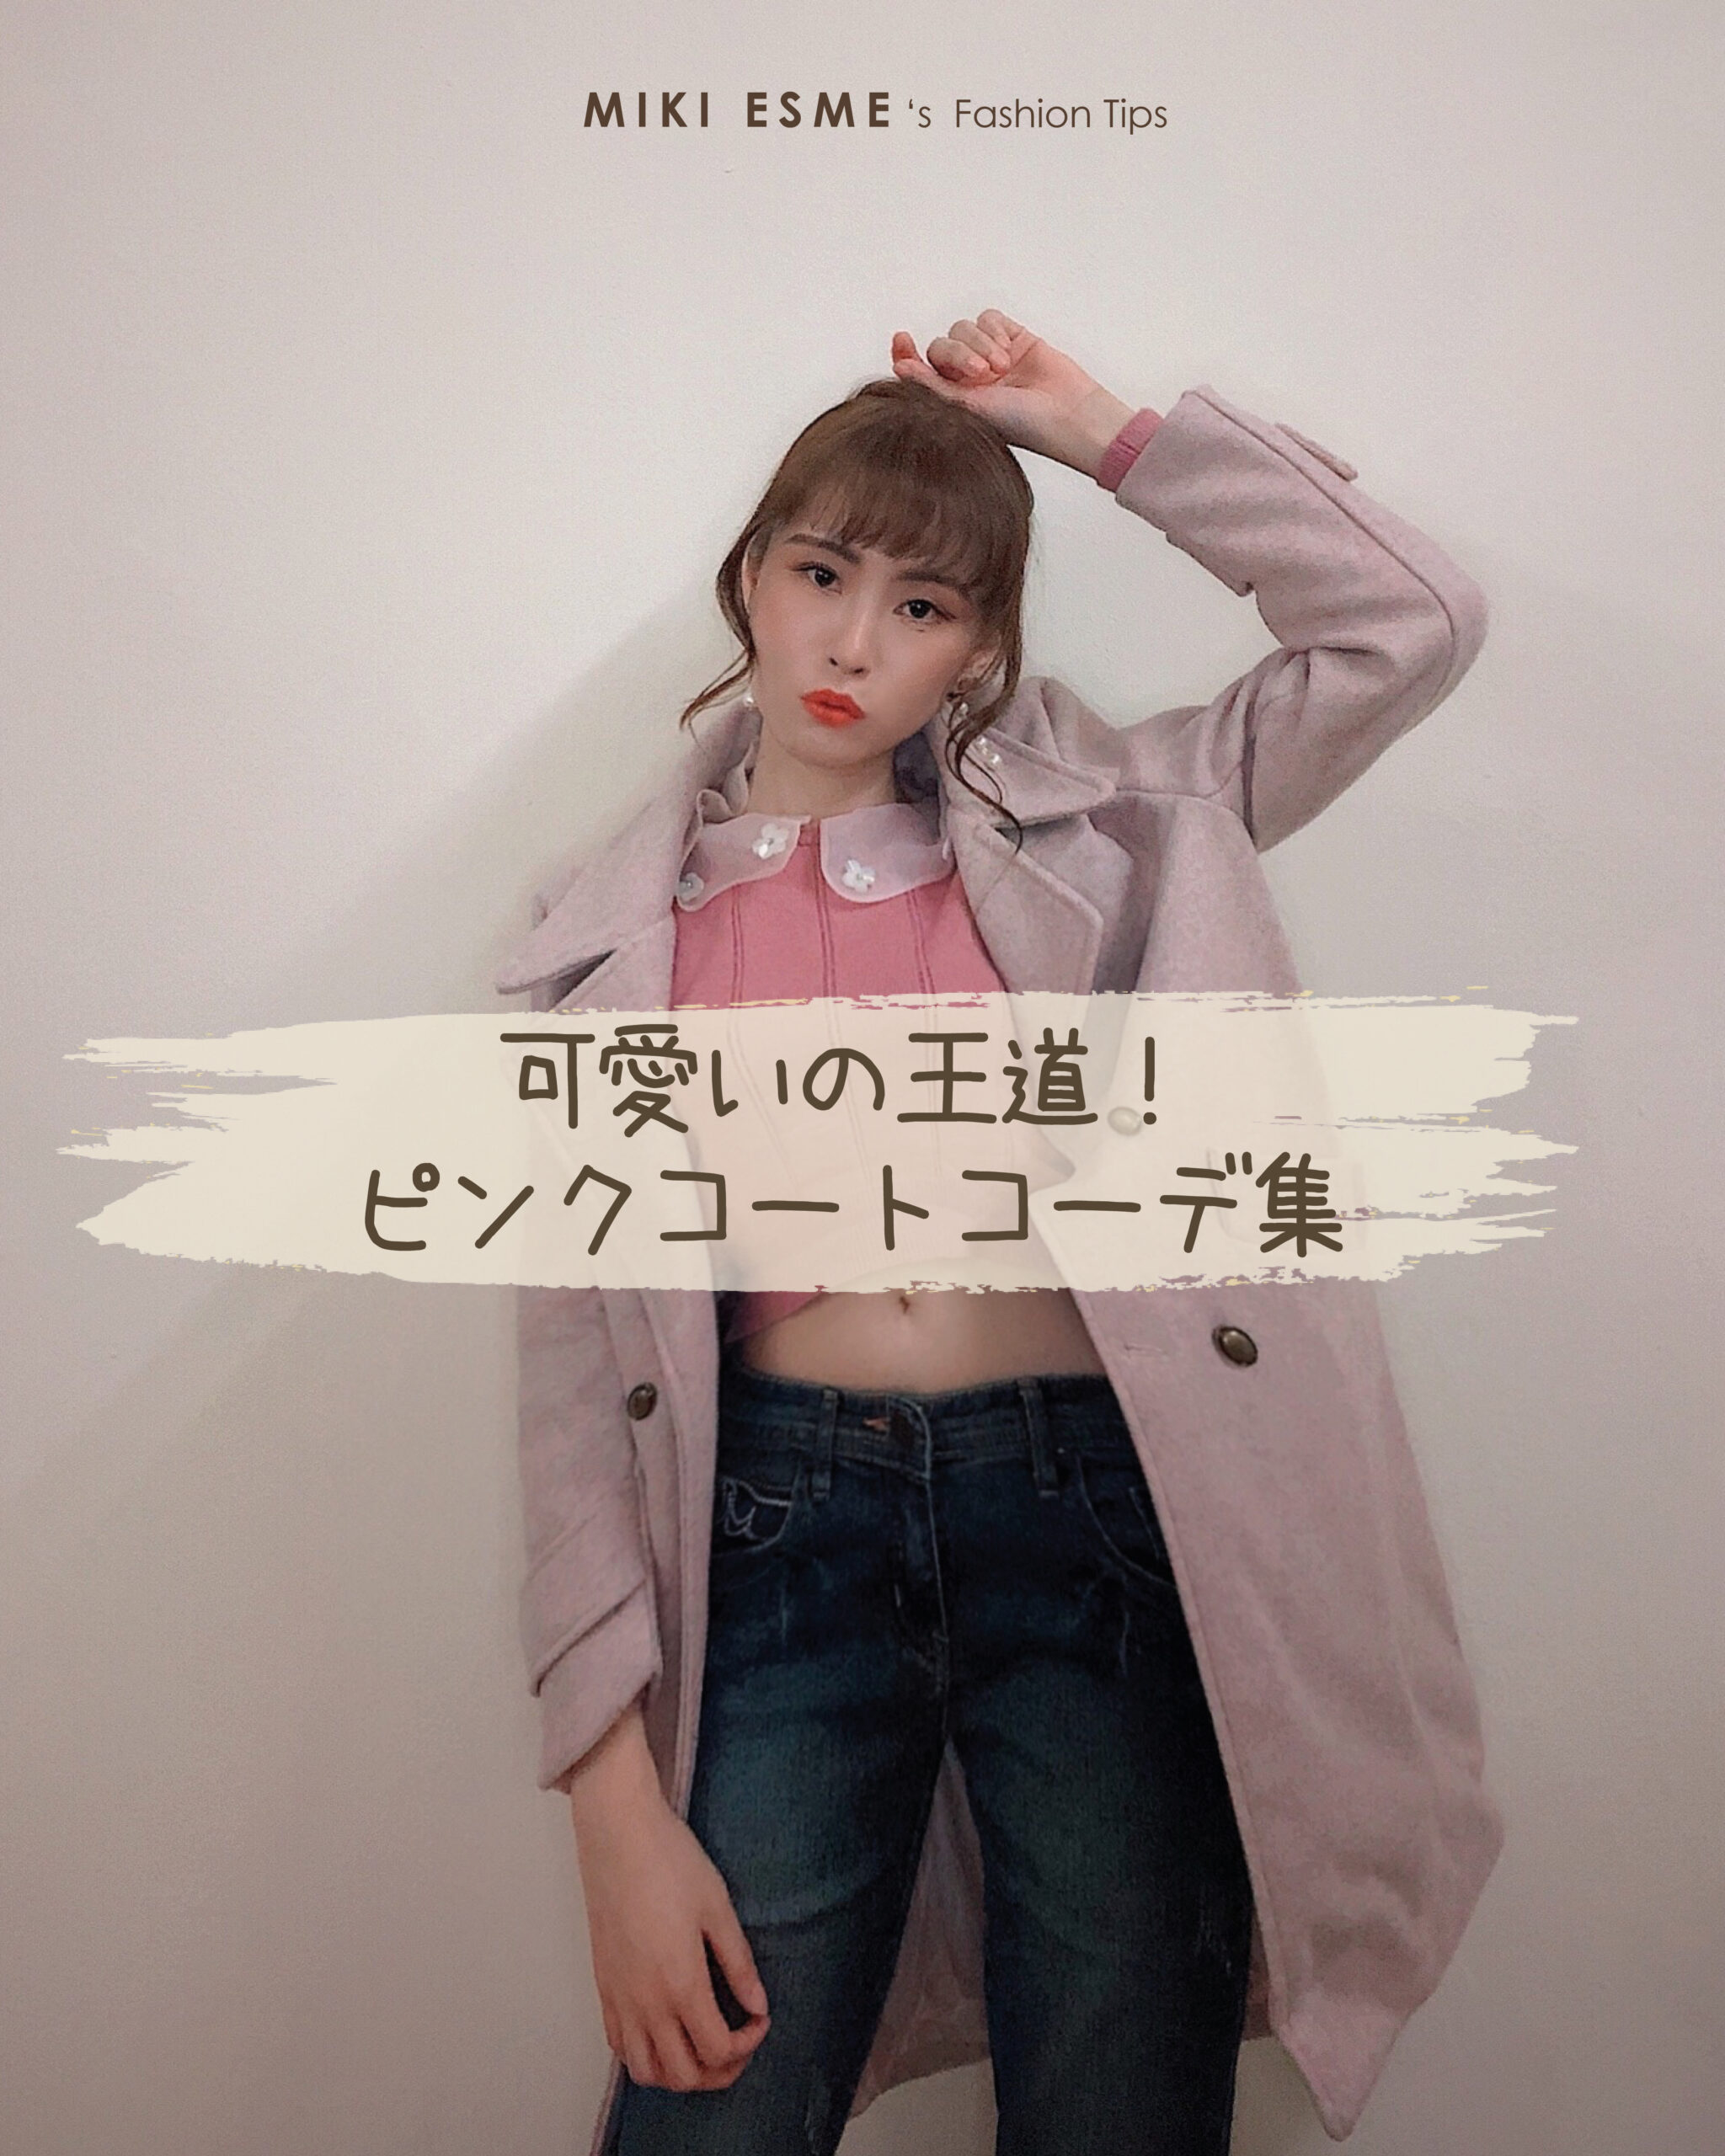 4 Outfit Ideas : How to Style a Pink Coat 可愛いの王道！『ピンクコートコーデ集』4選(c)MikiEsme.com